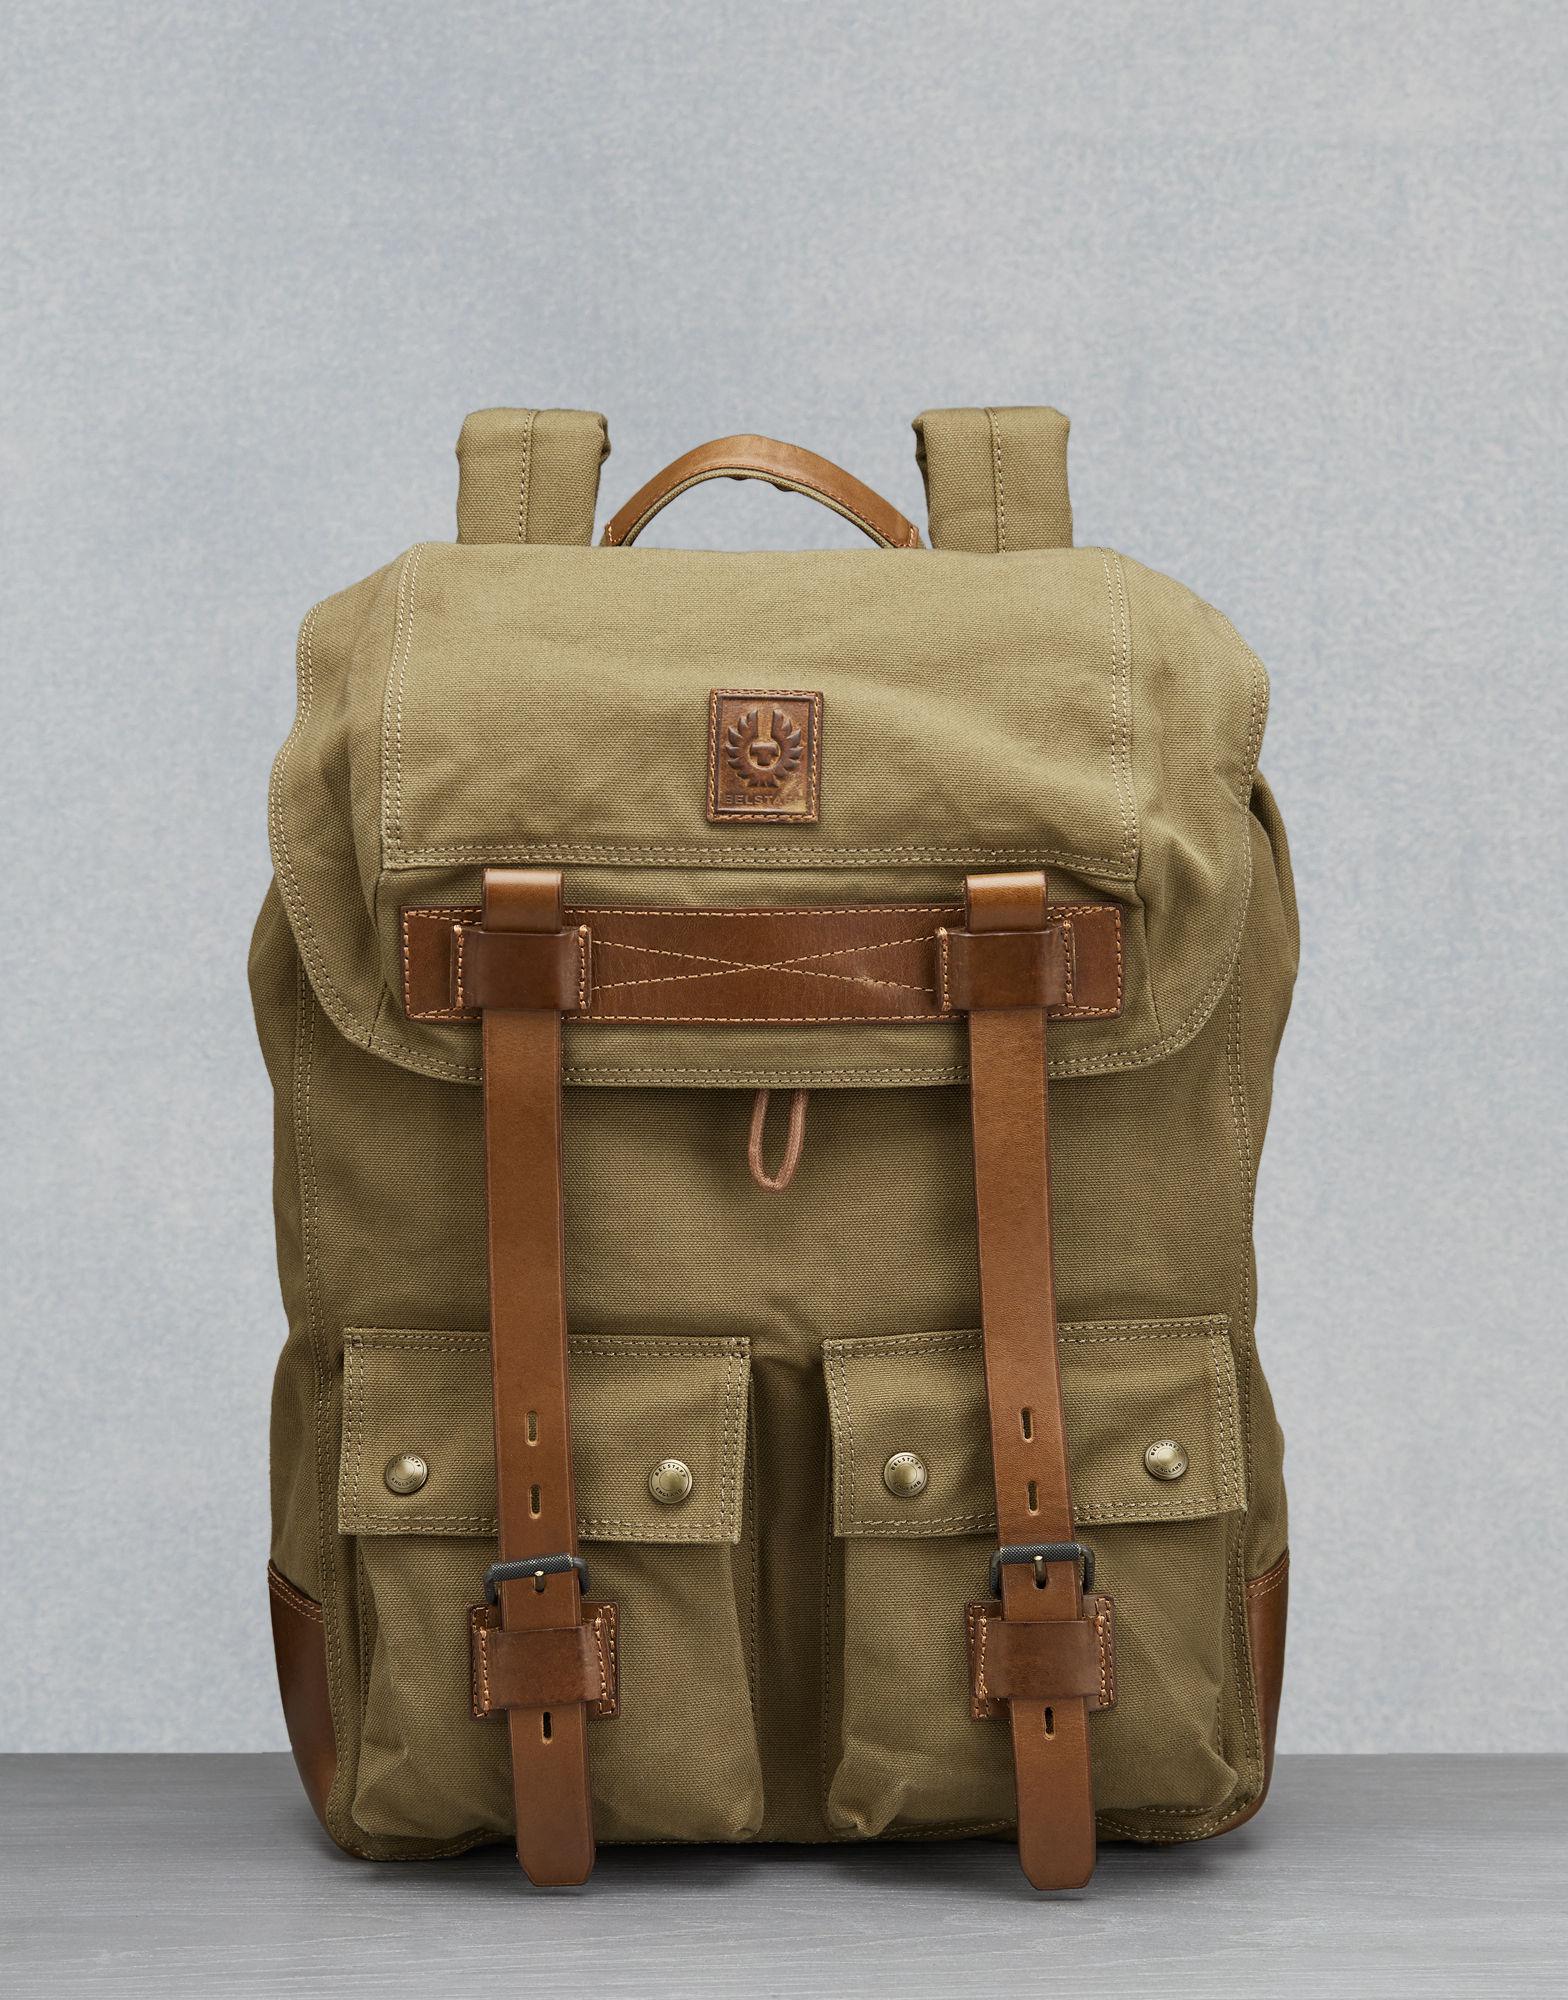 Belstaff Cotton Colonial Backpack in Khaki (Natural) for Men - Lyst